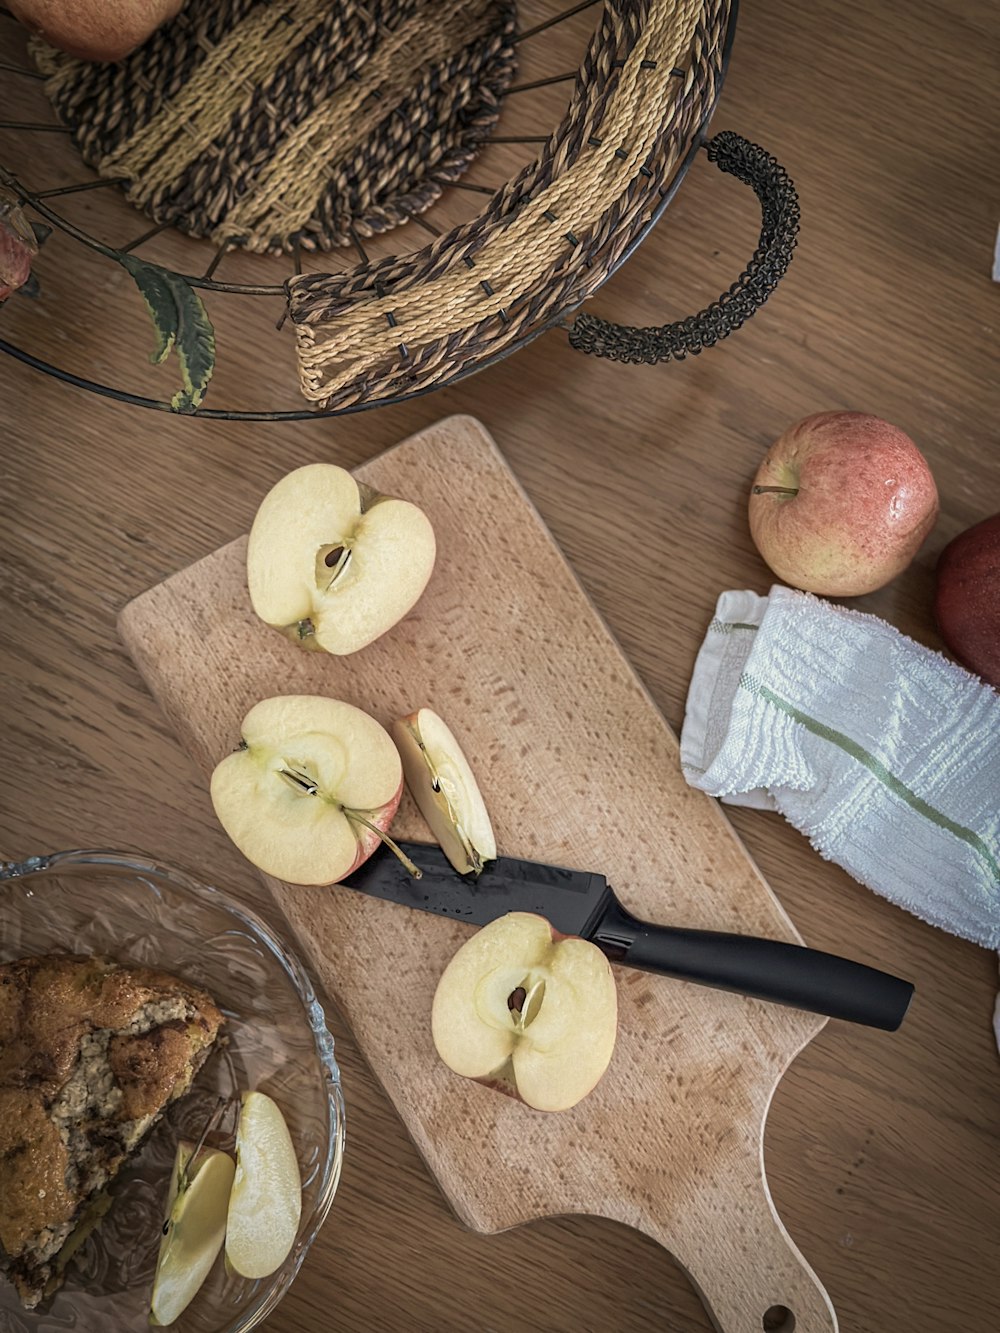 a cutting board topped with apples and a knife